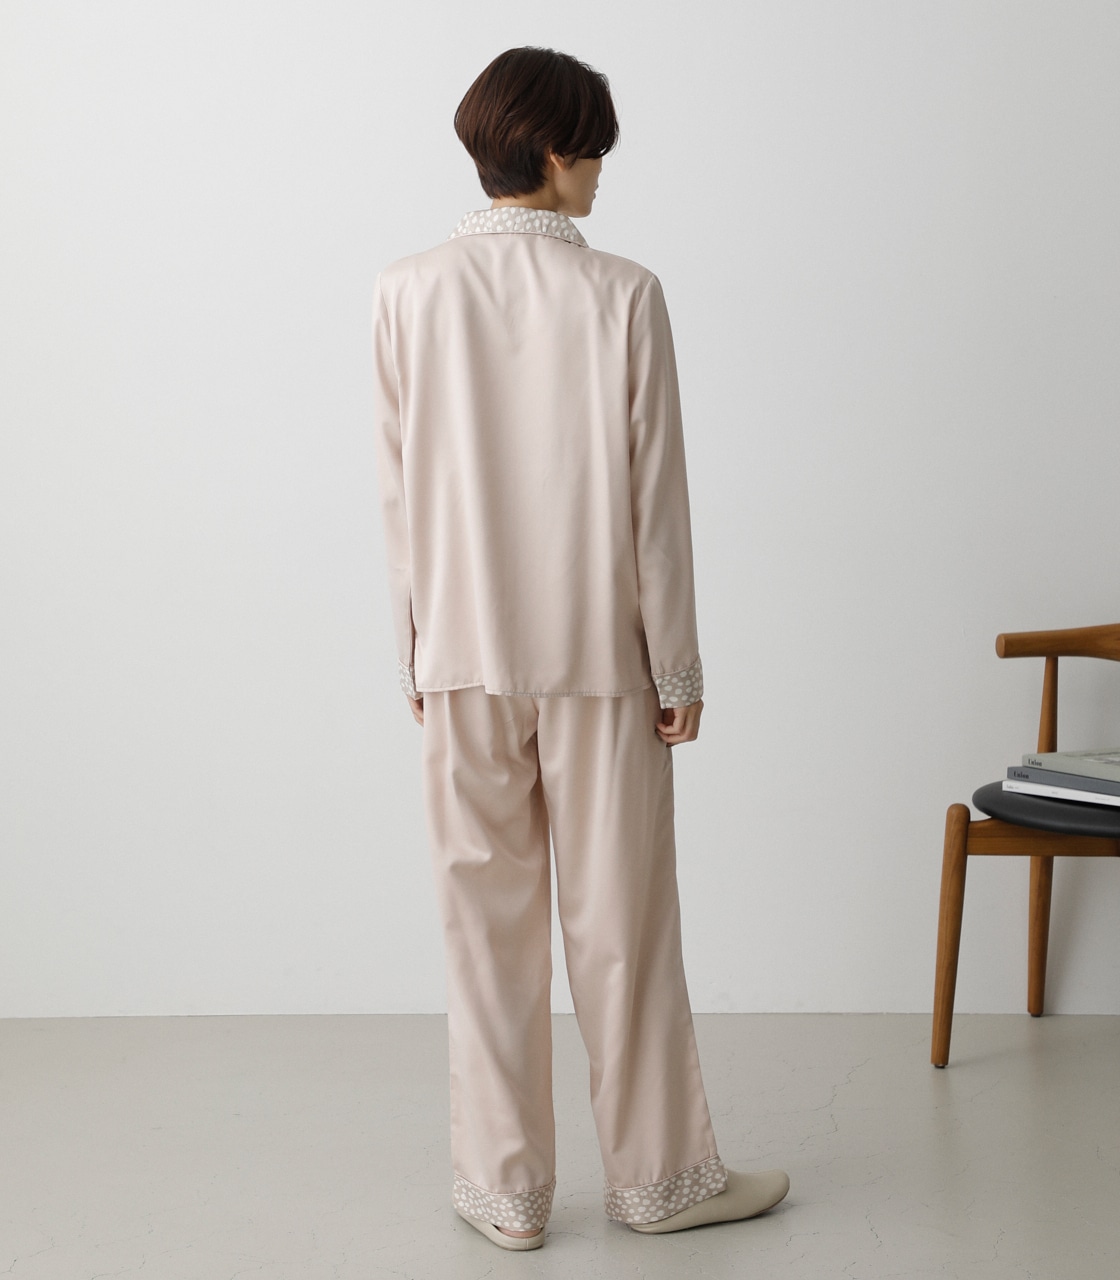 T/H SATIN PIPING PAJAMAS/T/Hサテンパイピングパジャマ 詳細画像 L/BEG 7